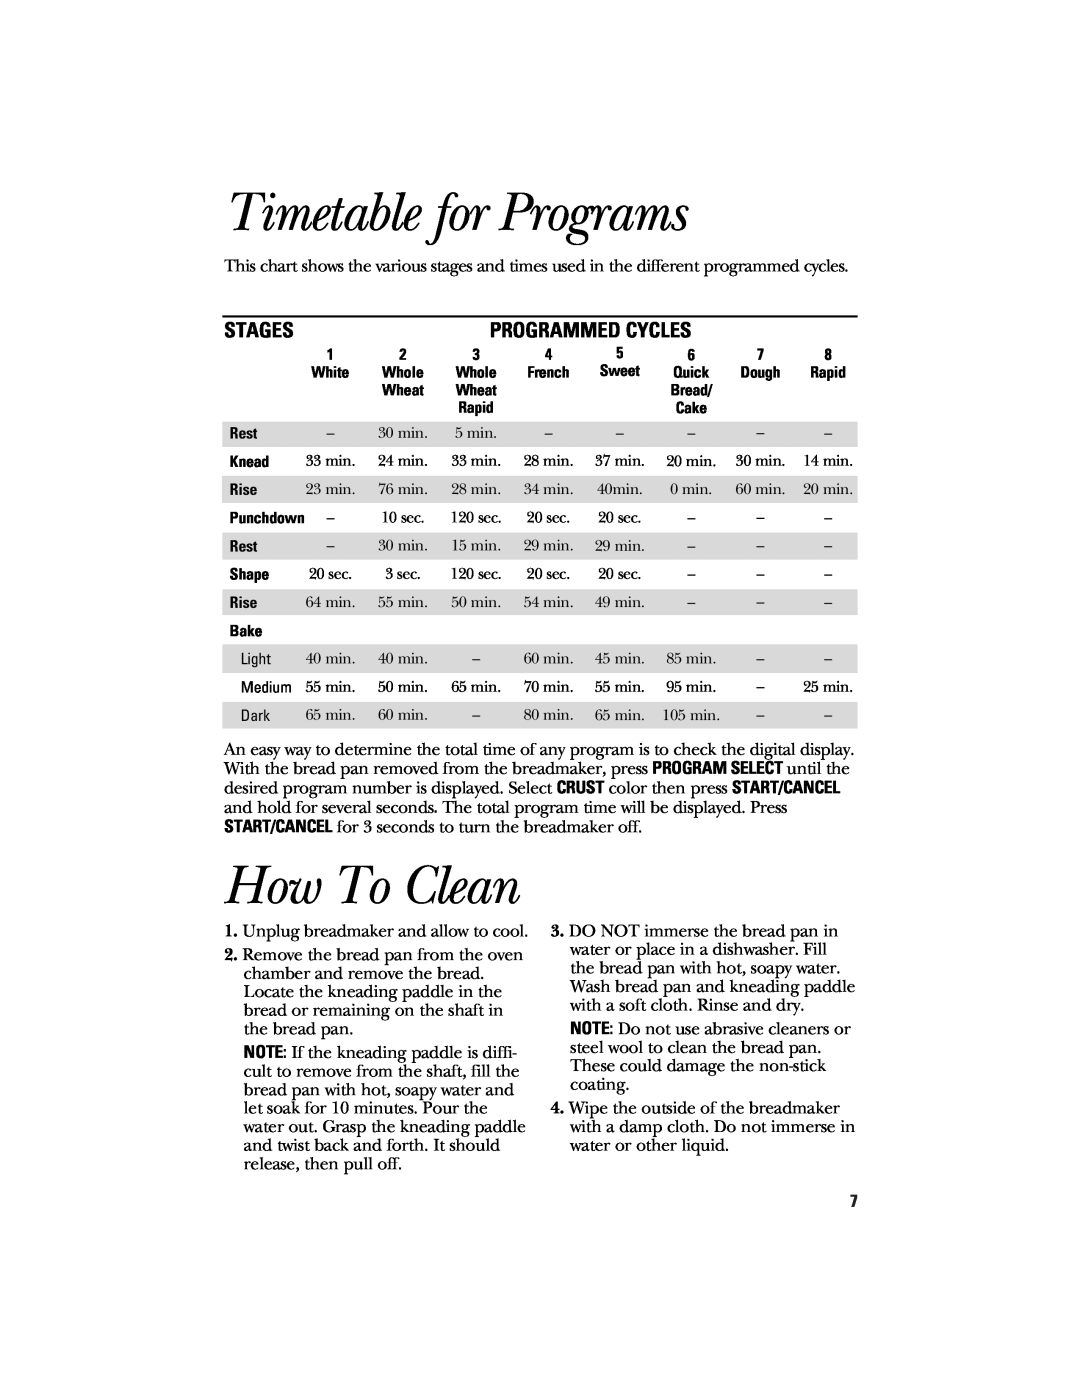 GE 840081500 quick start Timetable for Programs, How To Clean, Stages, Programmed Cycles 